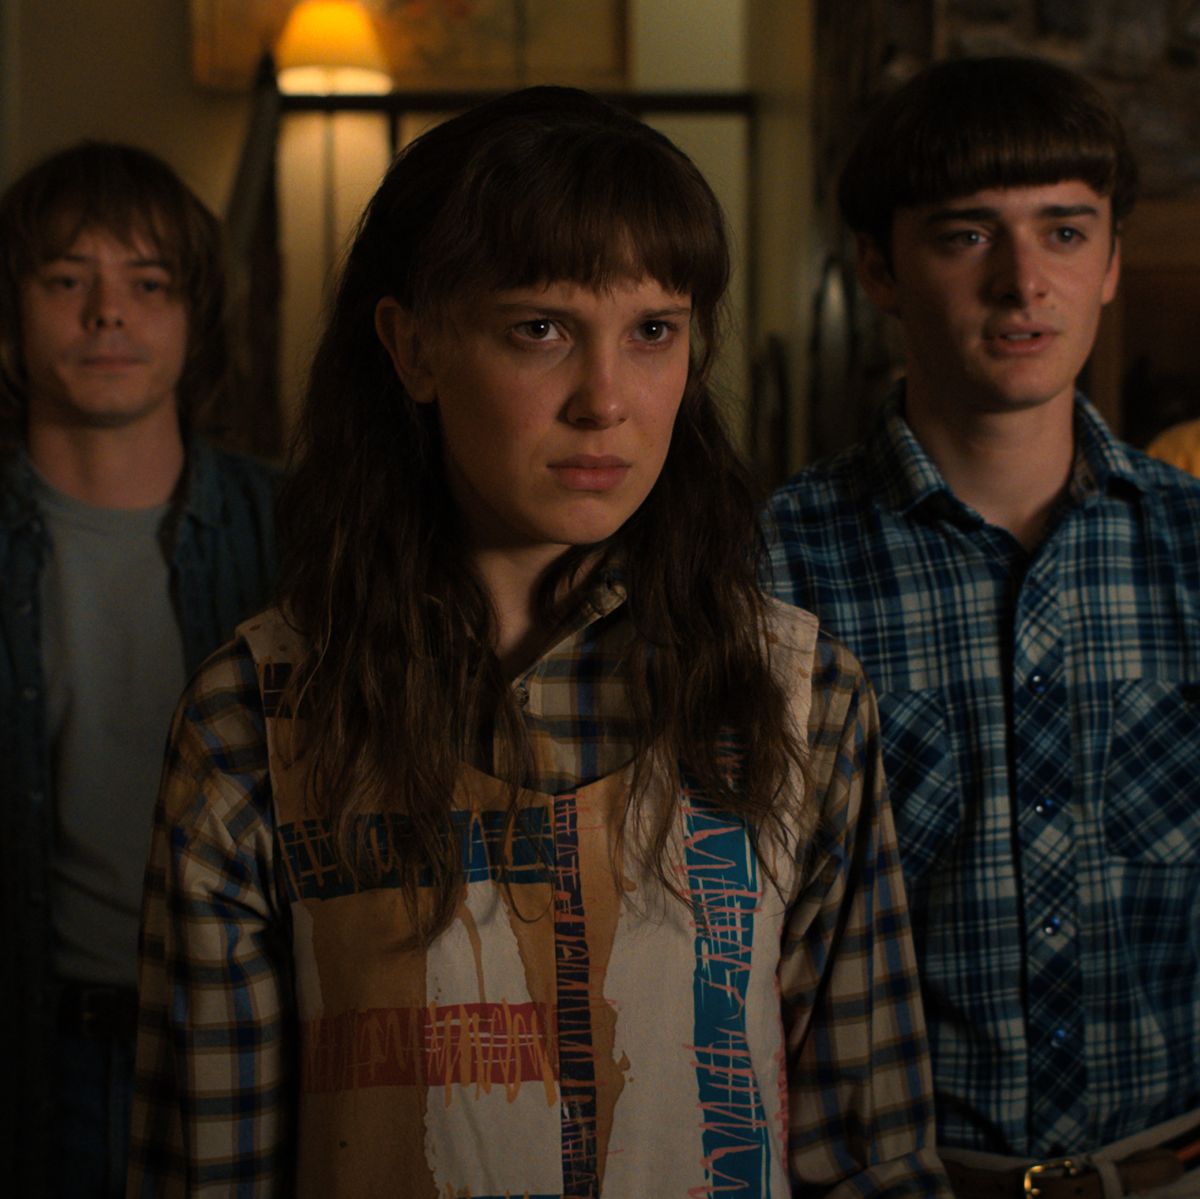 Stranger Things' Creators Deny Changing Controversial Scene – IndieWire